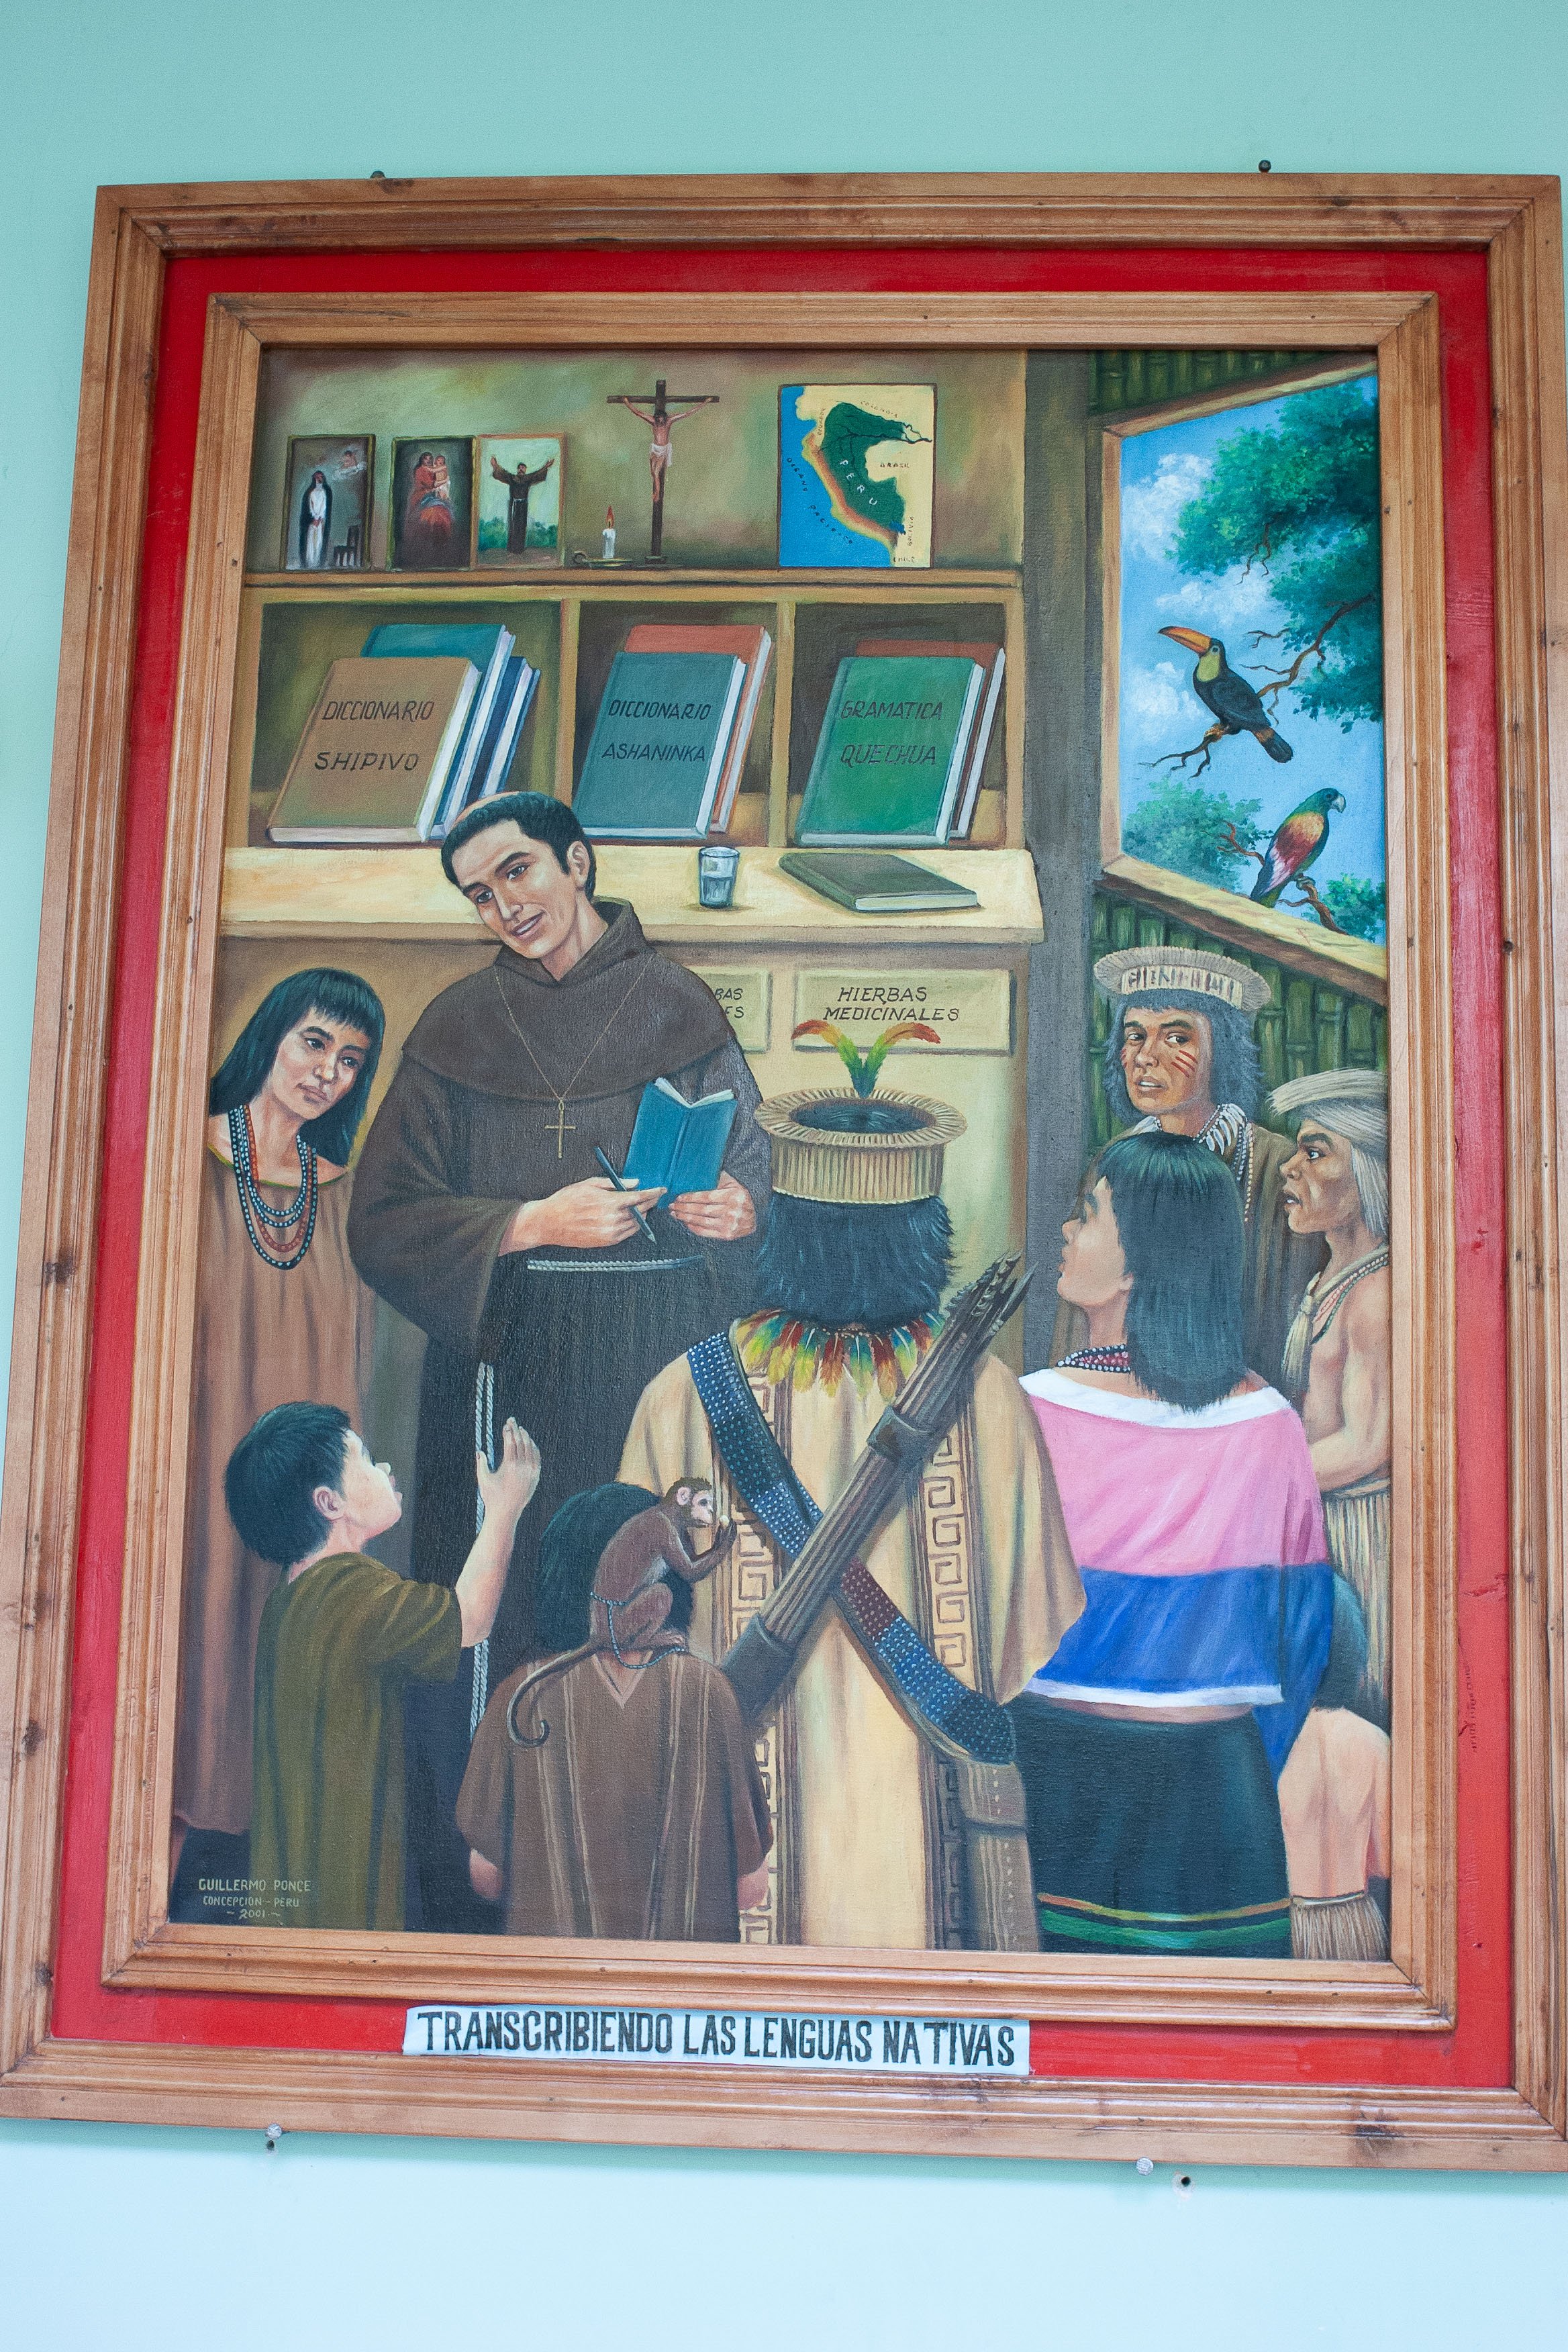  Mural at a monastery in the highlands of Peru in 2005. 